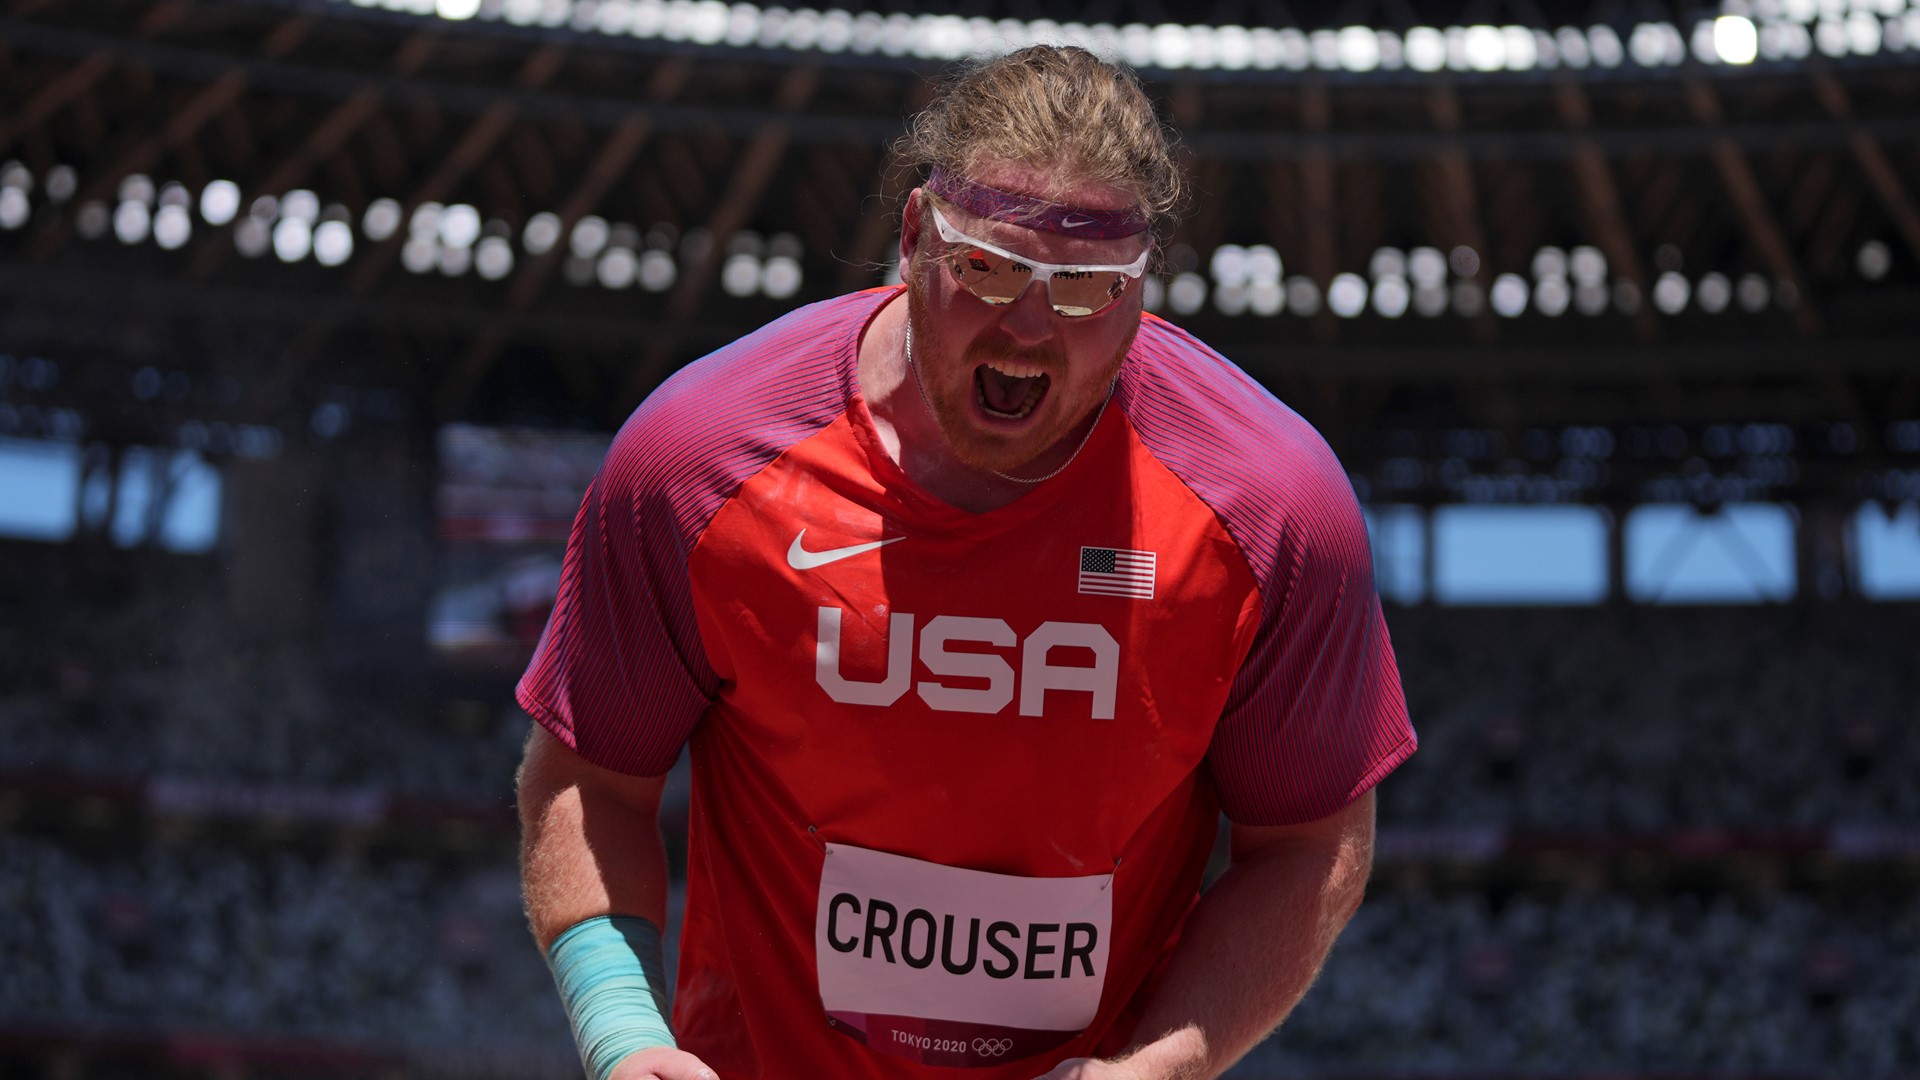 American Ryan Crouser set another Olympic record for shot put gold, but the U.S. men's relay team suffered another failure in a major track event.